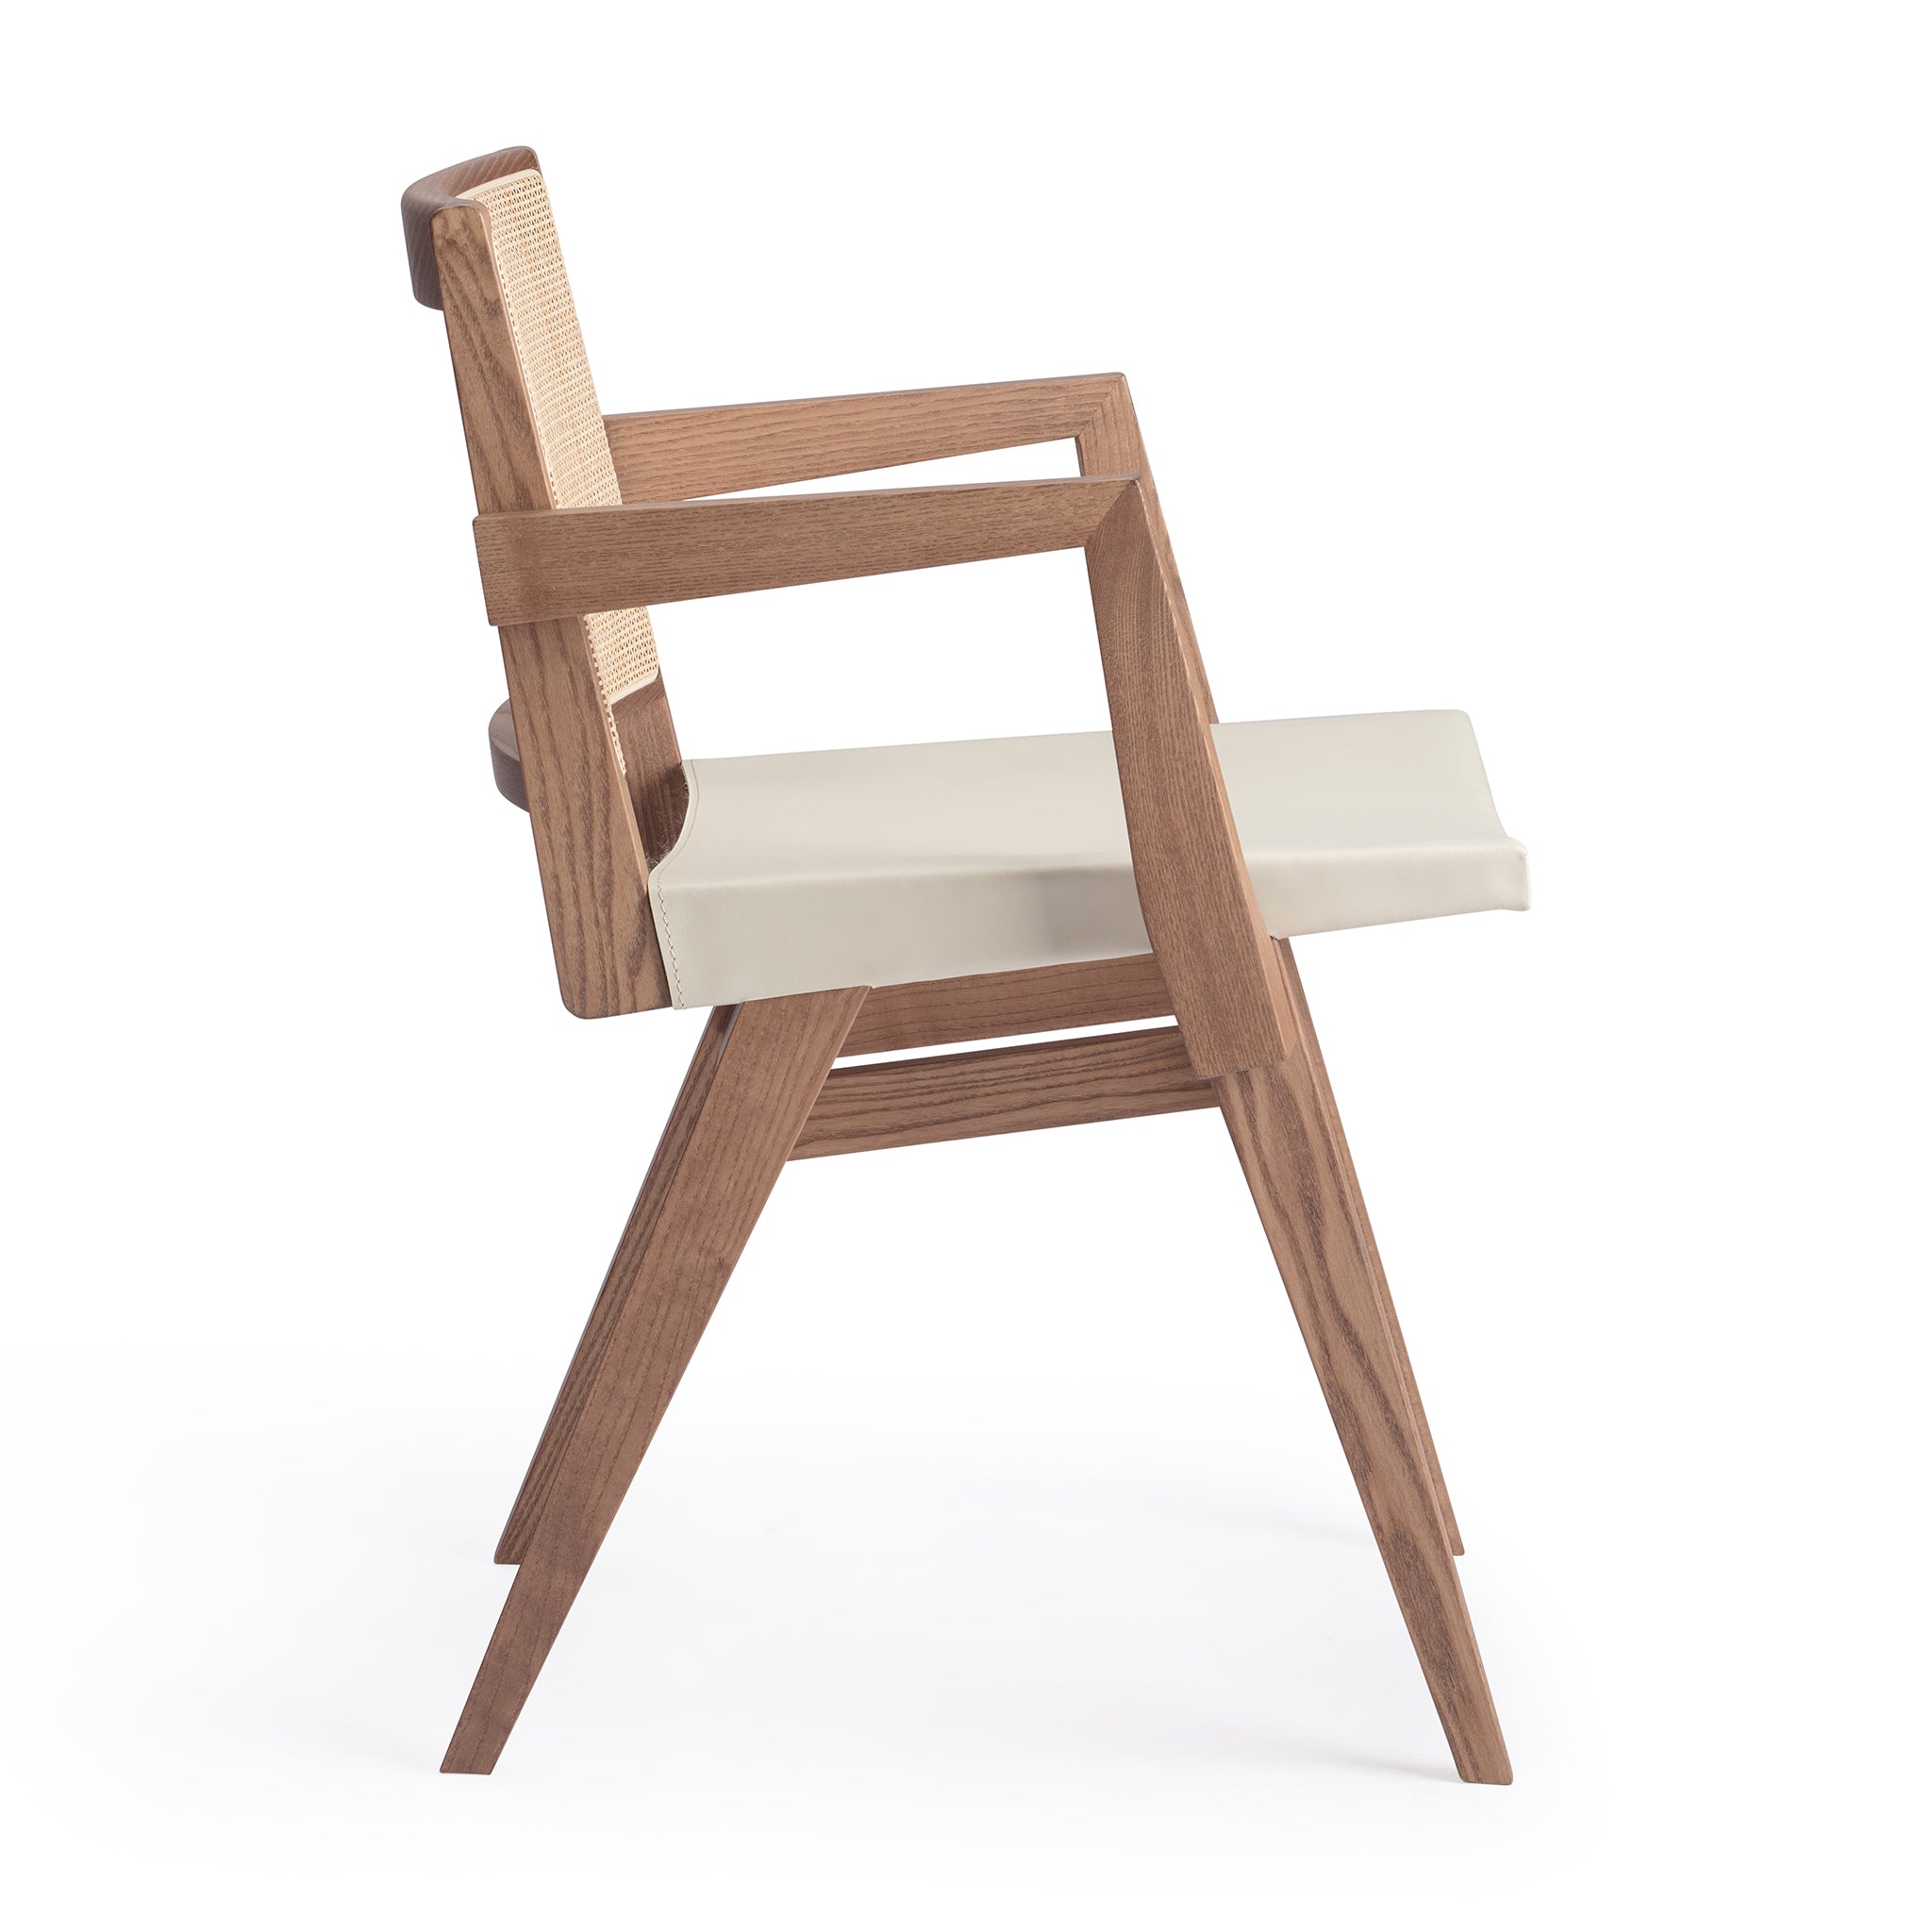 Side view of an "Elye" designer dining chair, walnut stained ash frame, square weave cane back, contract grade off white leather seat, produced by Klarel in Italy. #K40-1